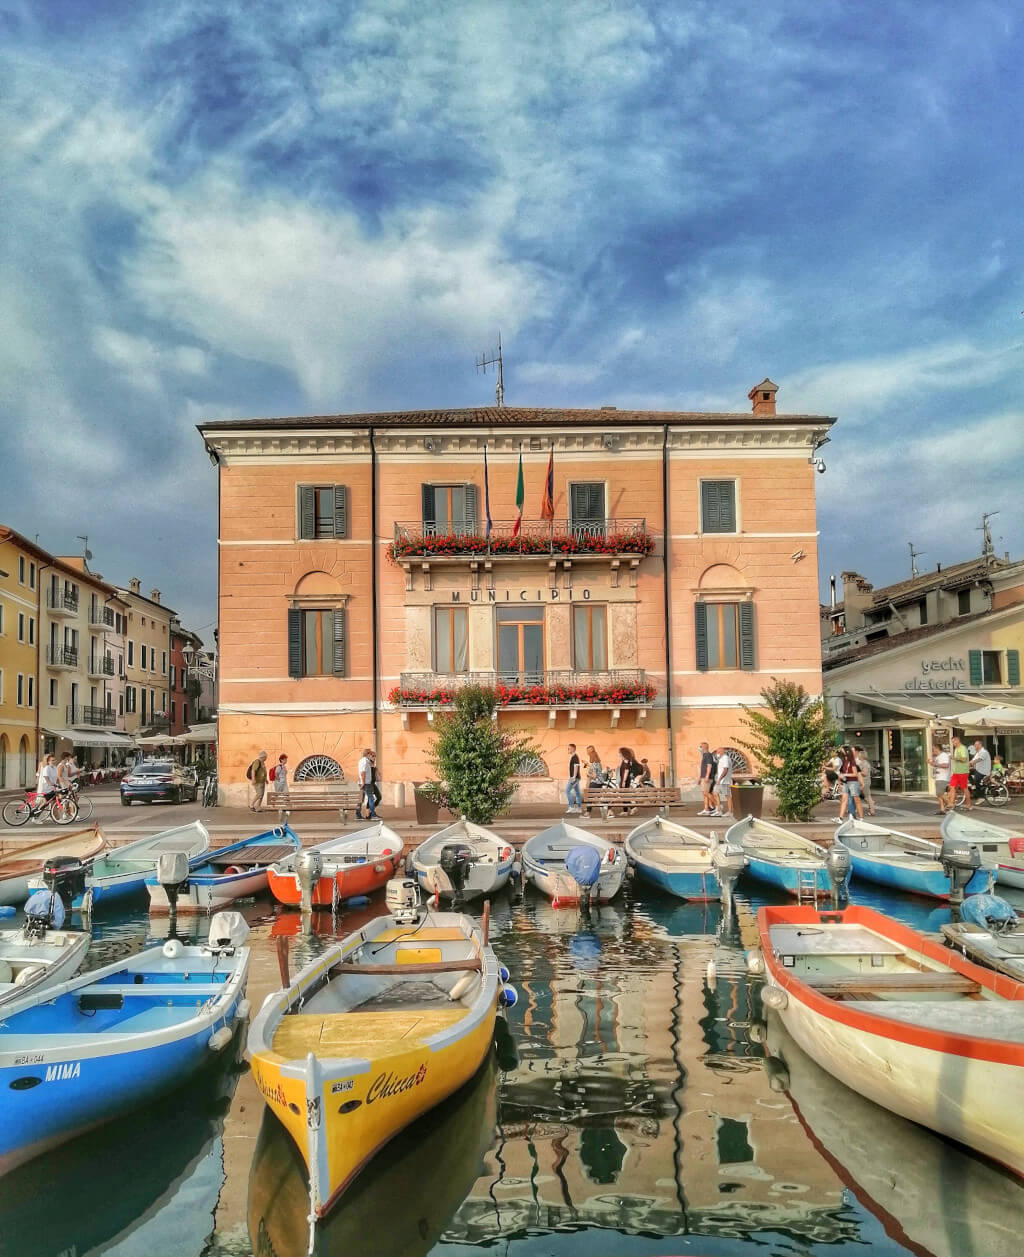 Three things to see in Bardolino